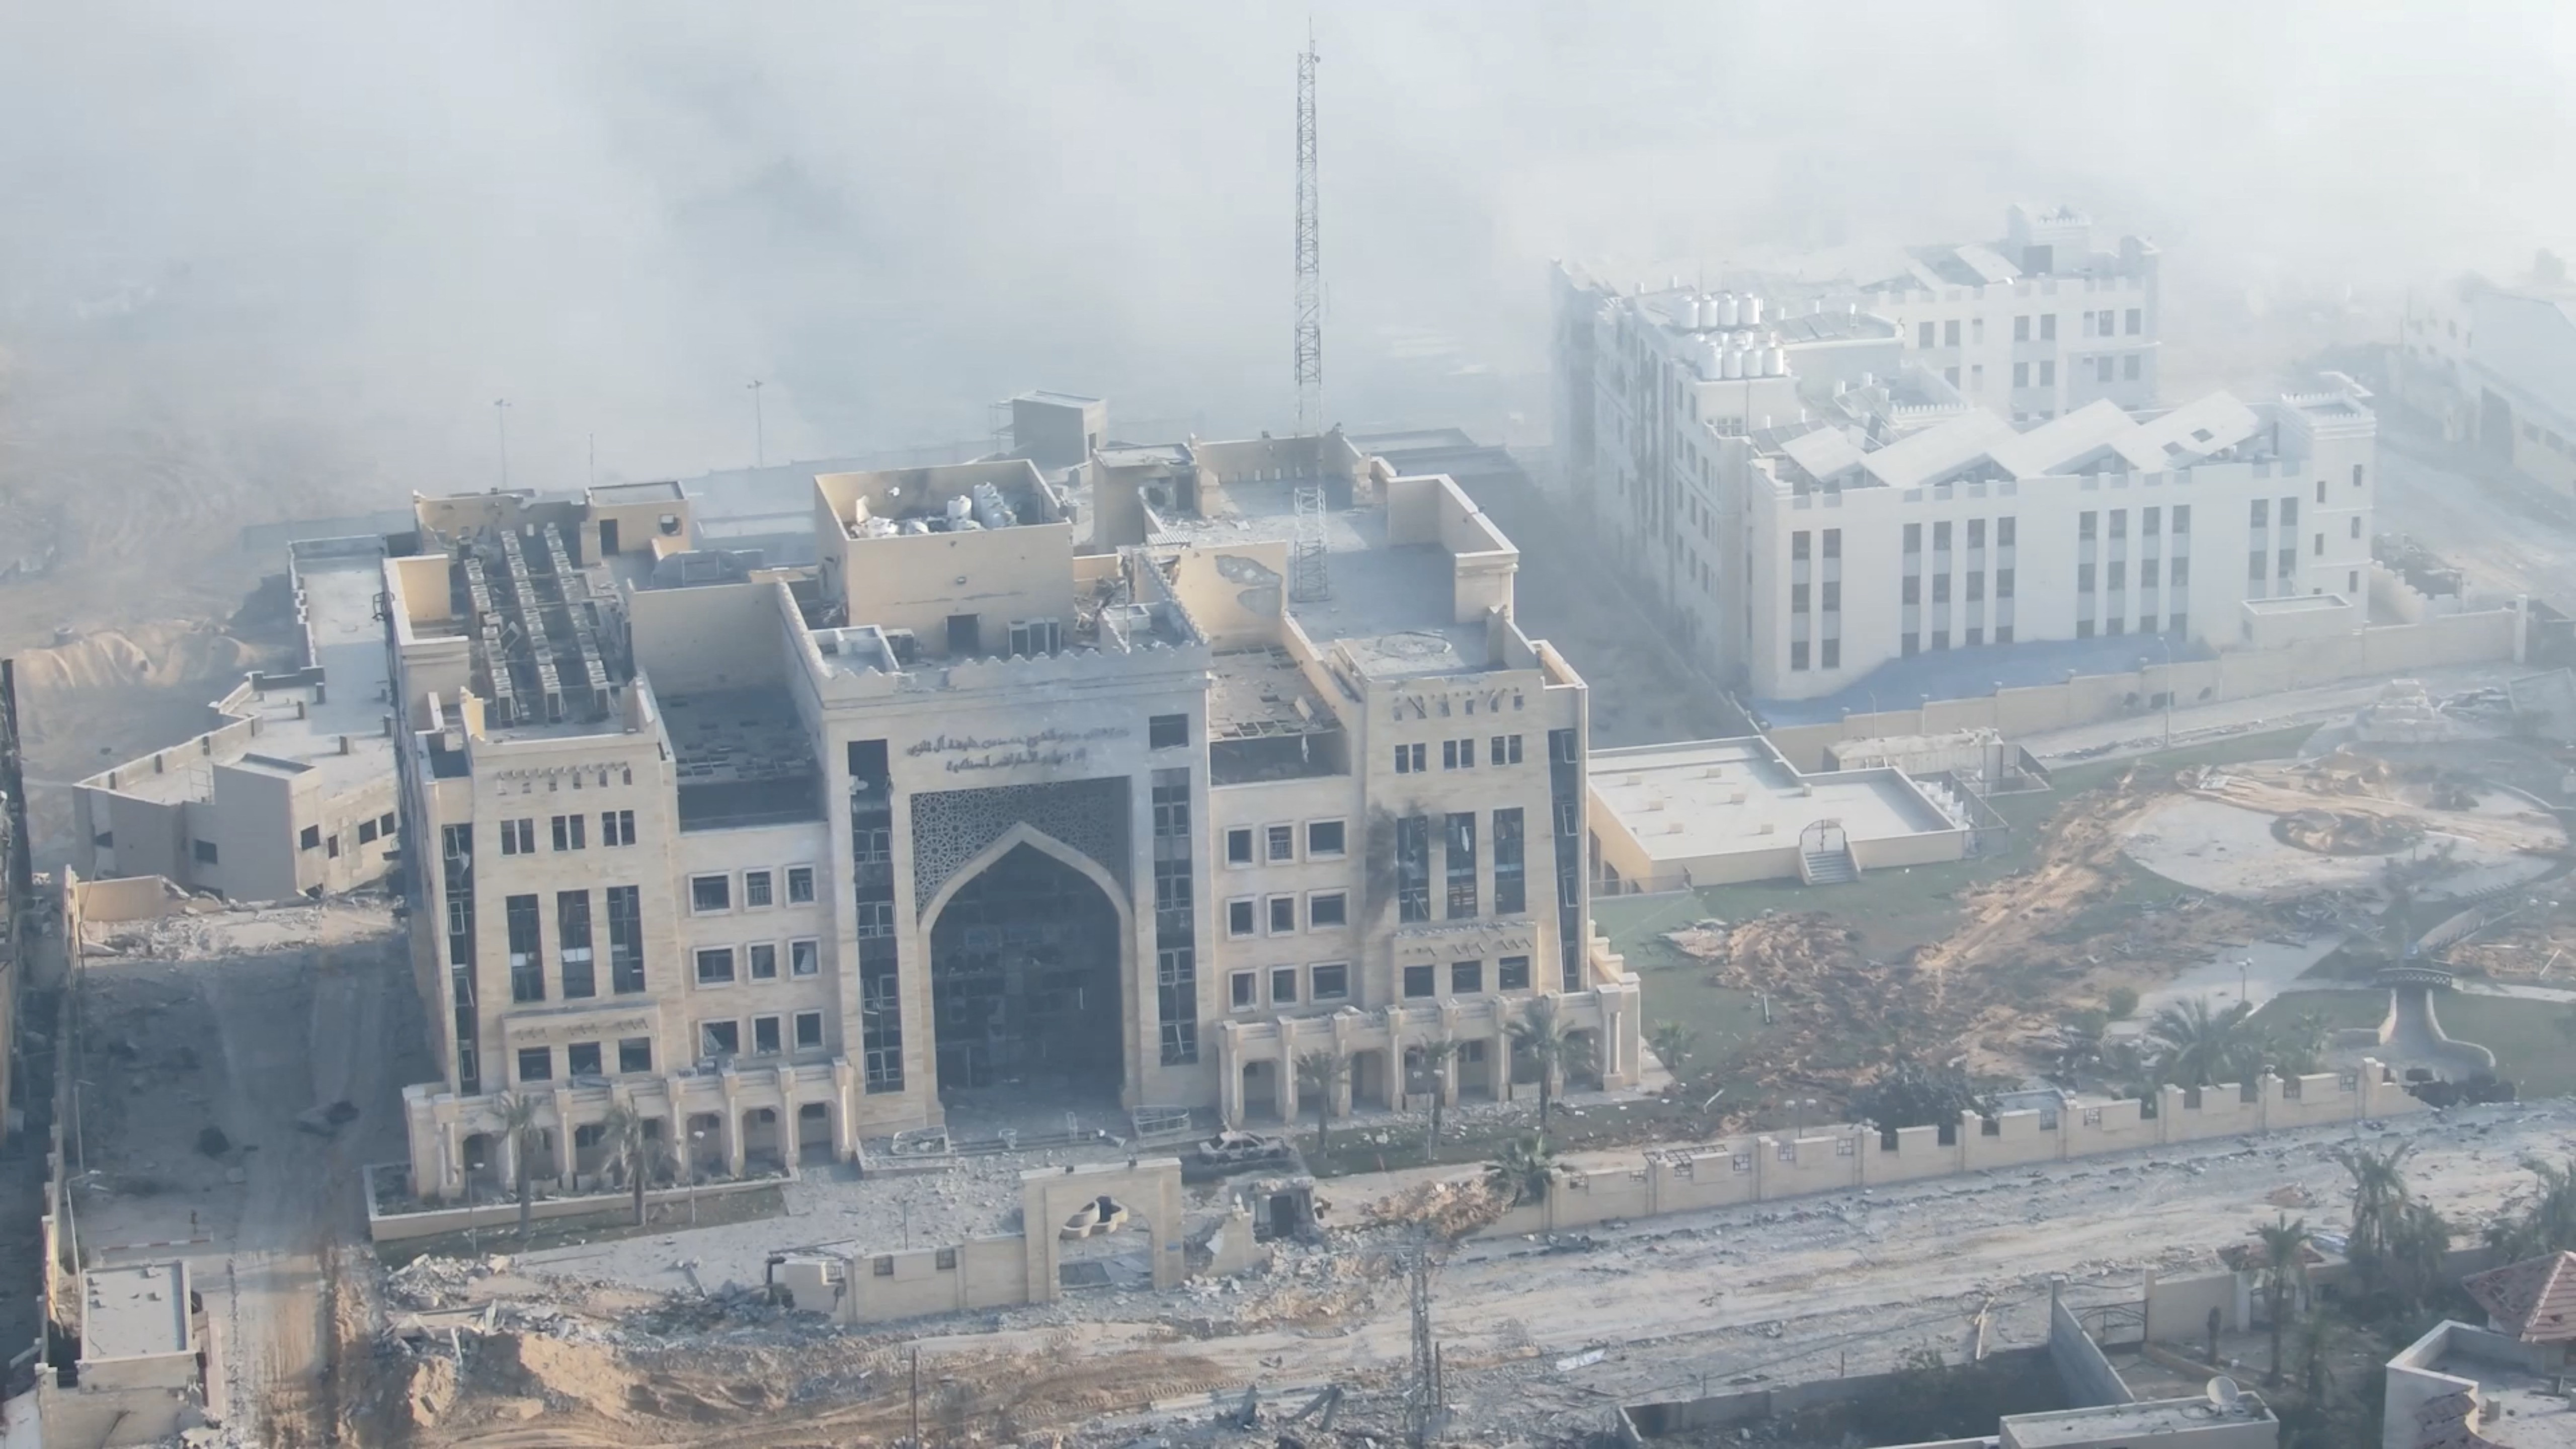 A view shows Sheikh Hamad Hospital, amid the ongoing conflict between Israel and the Palestinian Islamist group Hamas, at a location given as Gaza